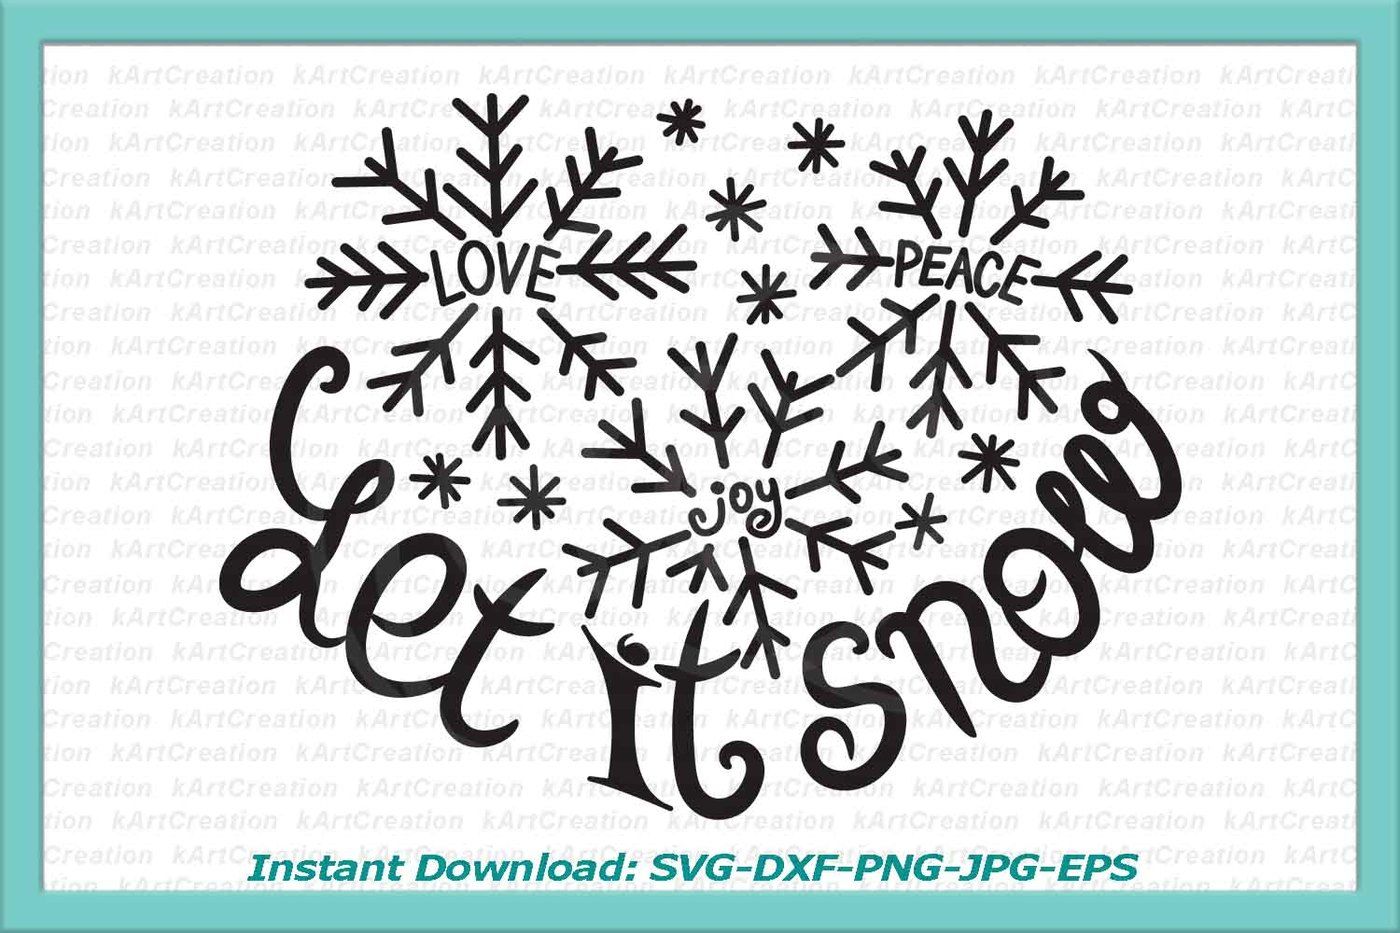 Let It Snow Svg Saying File Cutting File Christmas Svg Winter Svg Christmas Words Christmas Wishes Svg Let Is Snow Dxf Love Joy Peace By Kartcreation Thehungryjpeg Com